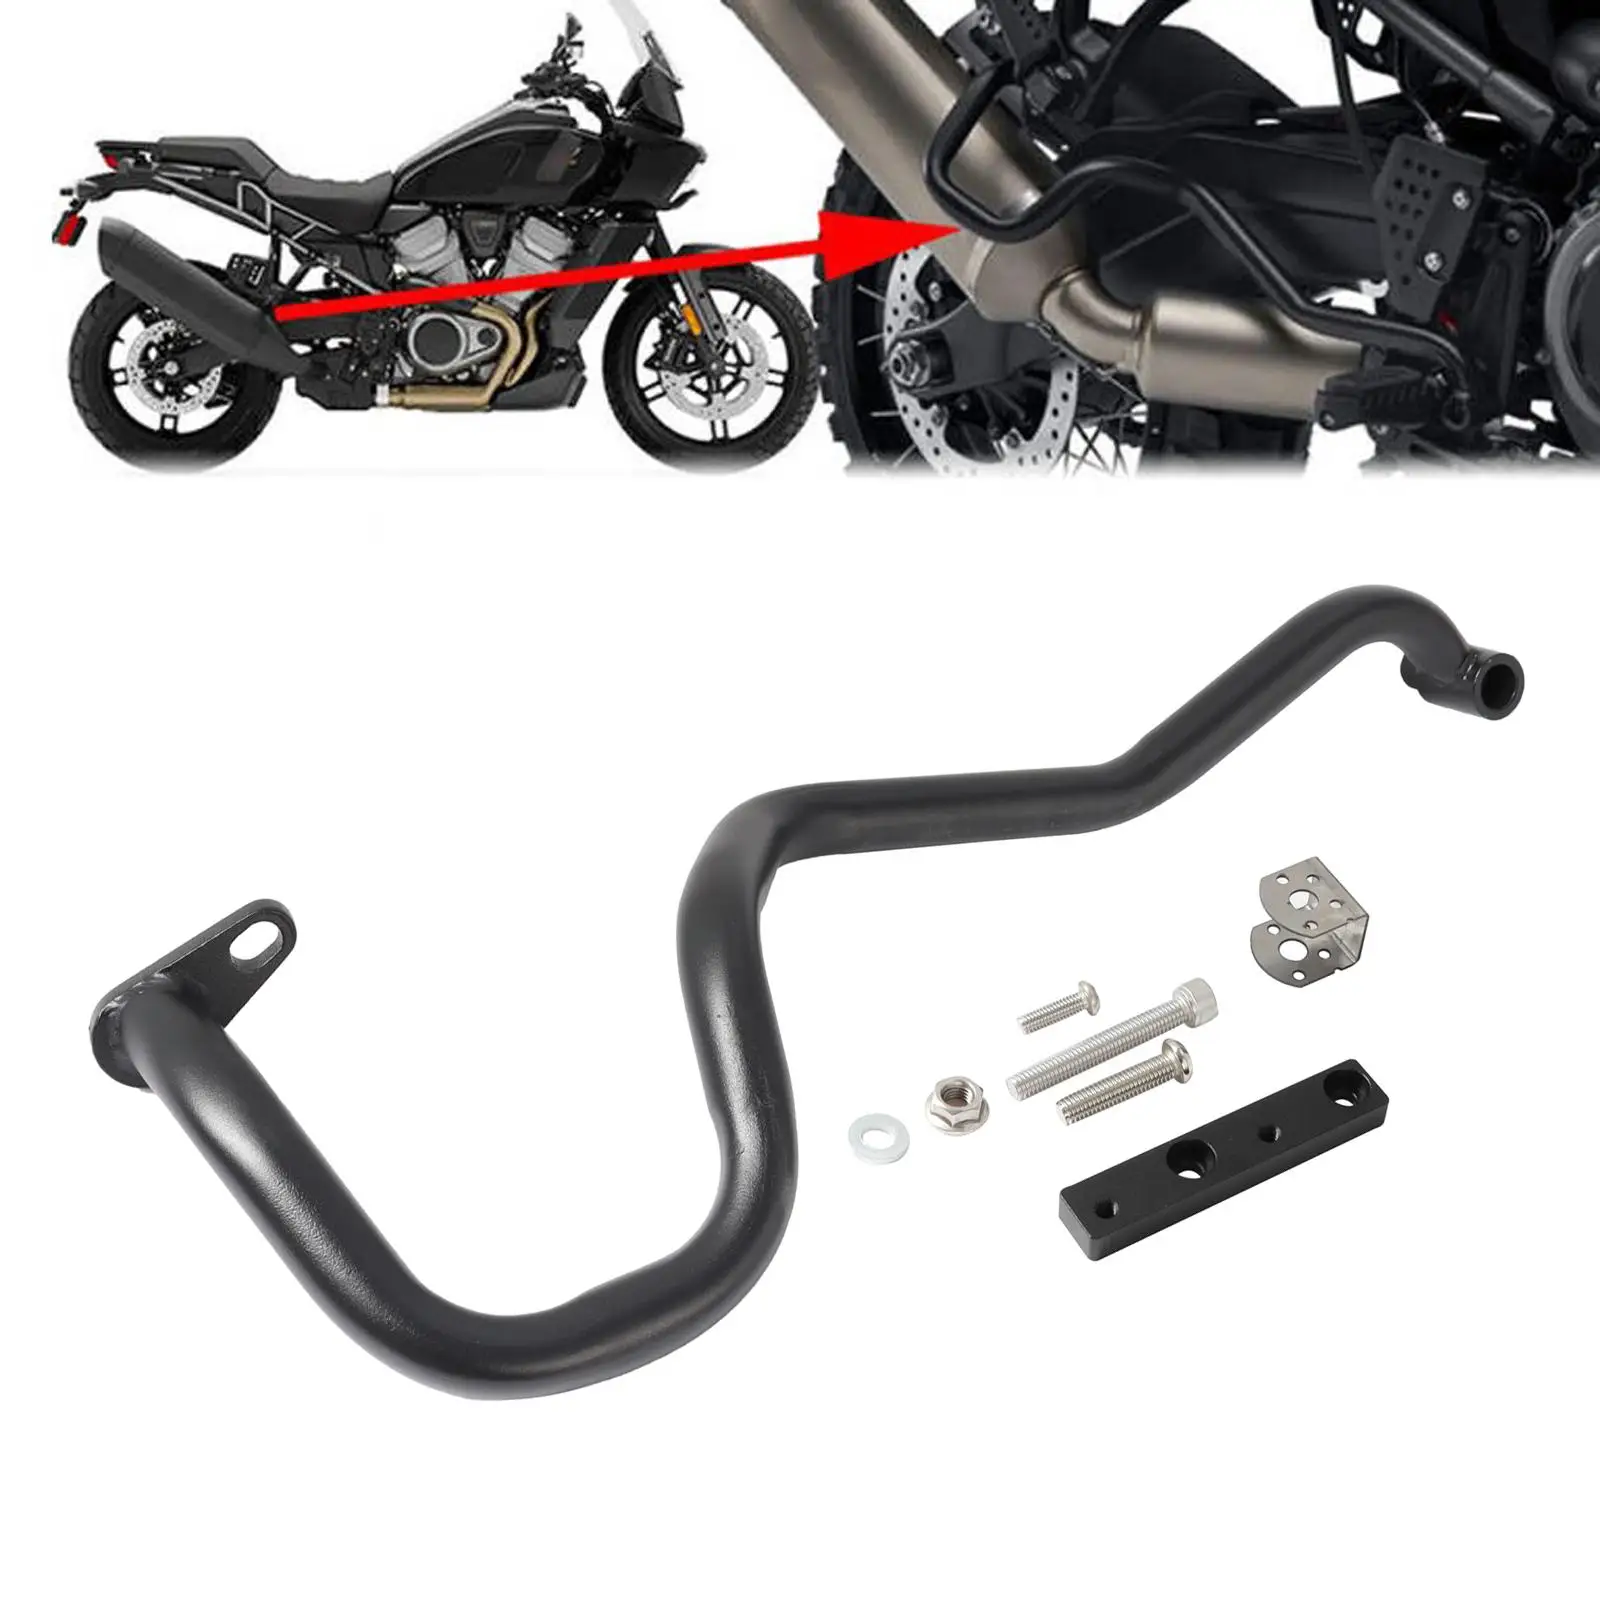 Exhaust Pipe Guard Bumper Accessories Fits for PA 1250 S